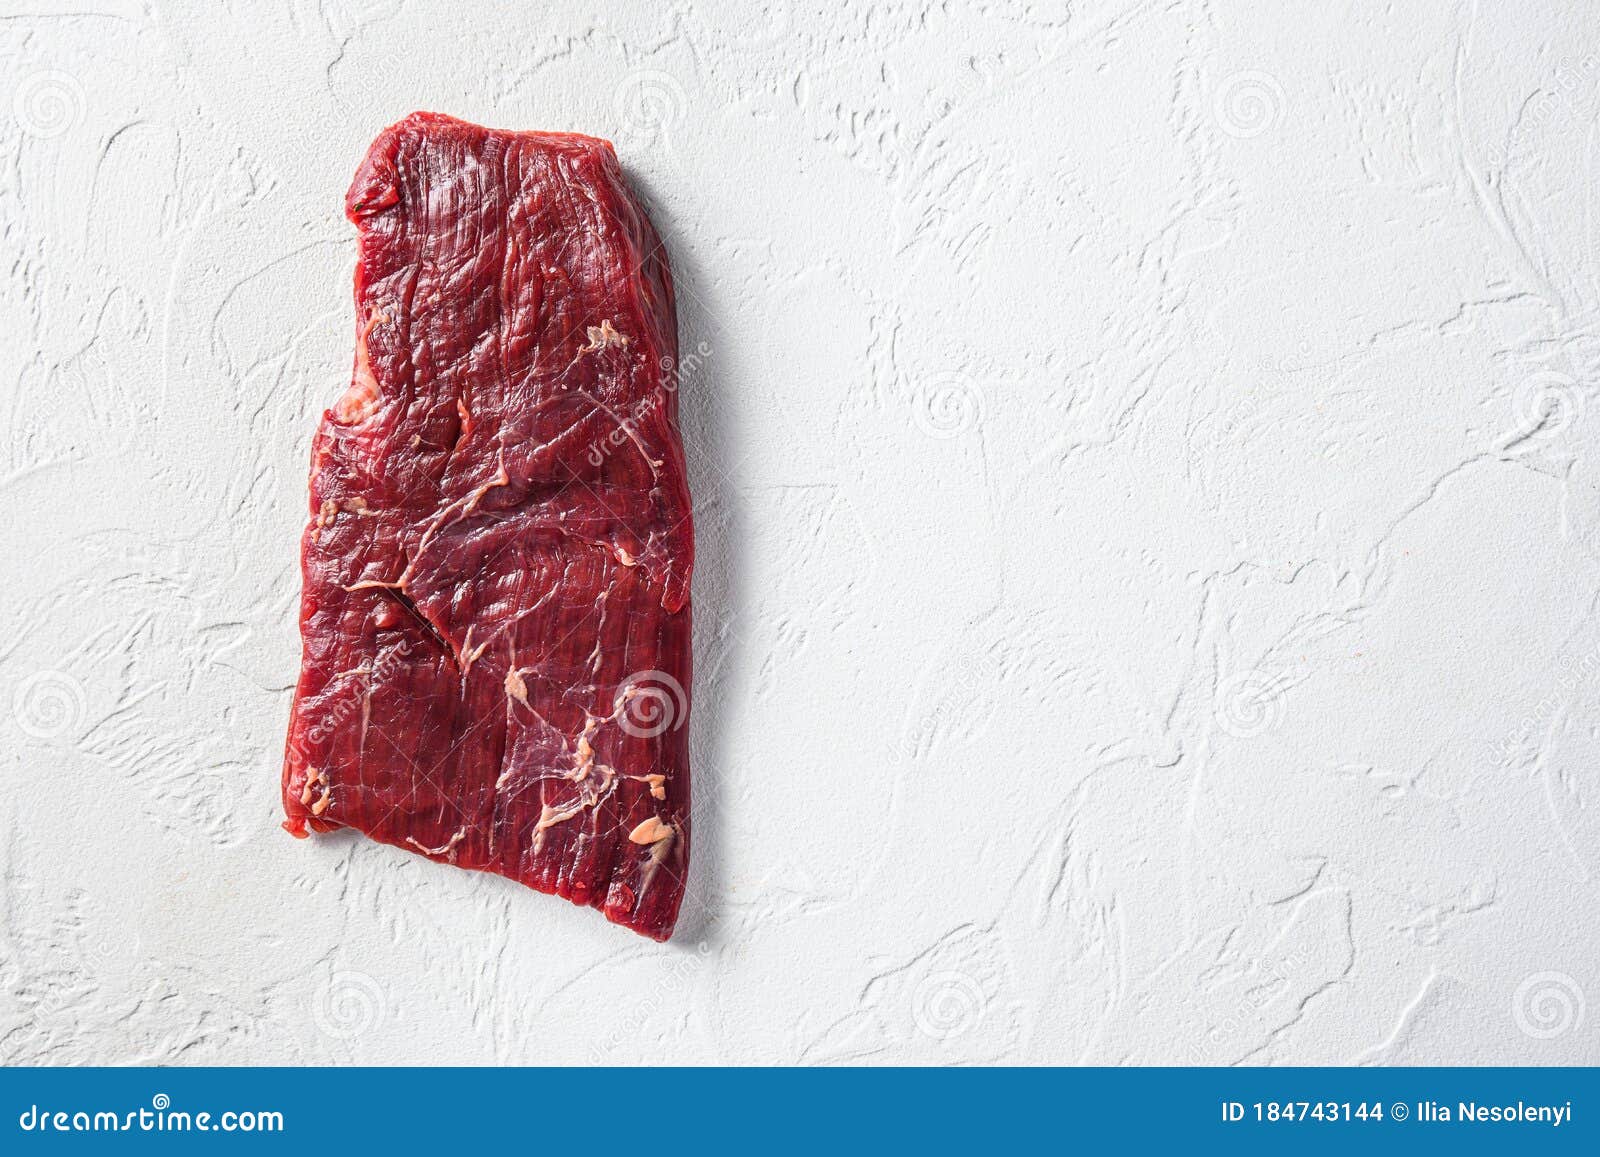 raw skirt or flank steak,on a white stone background top view space for text